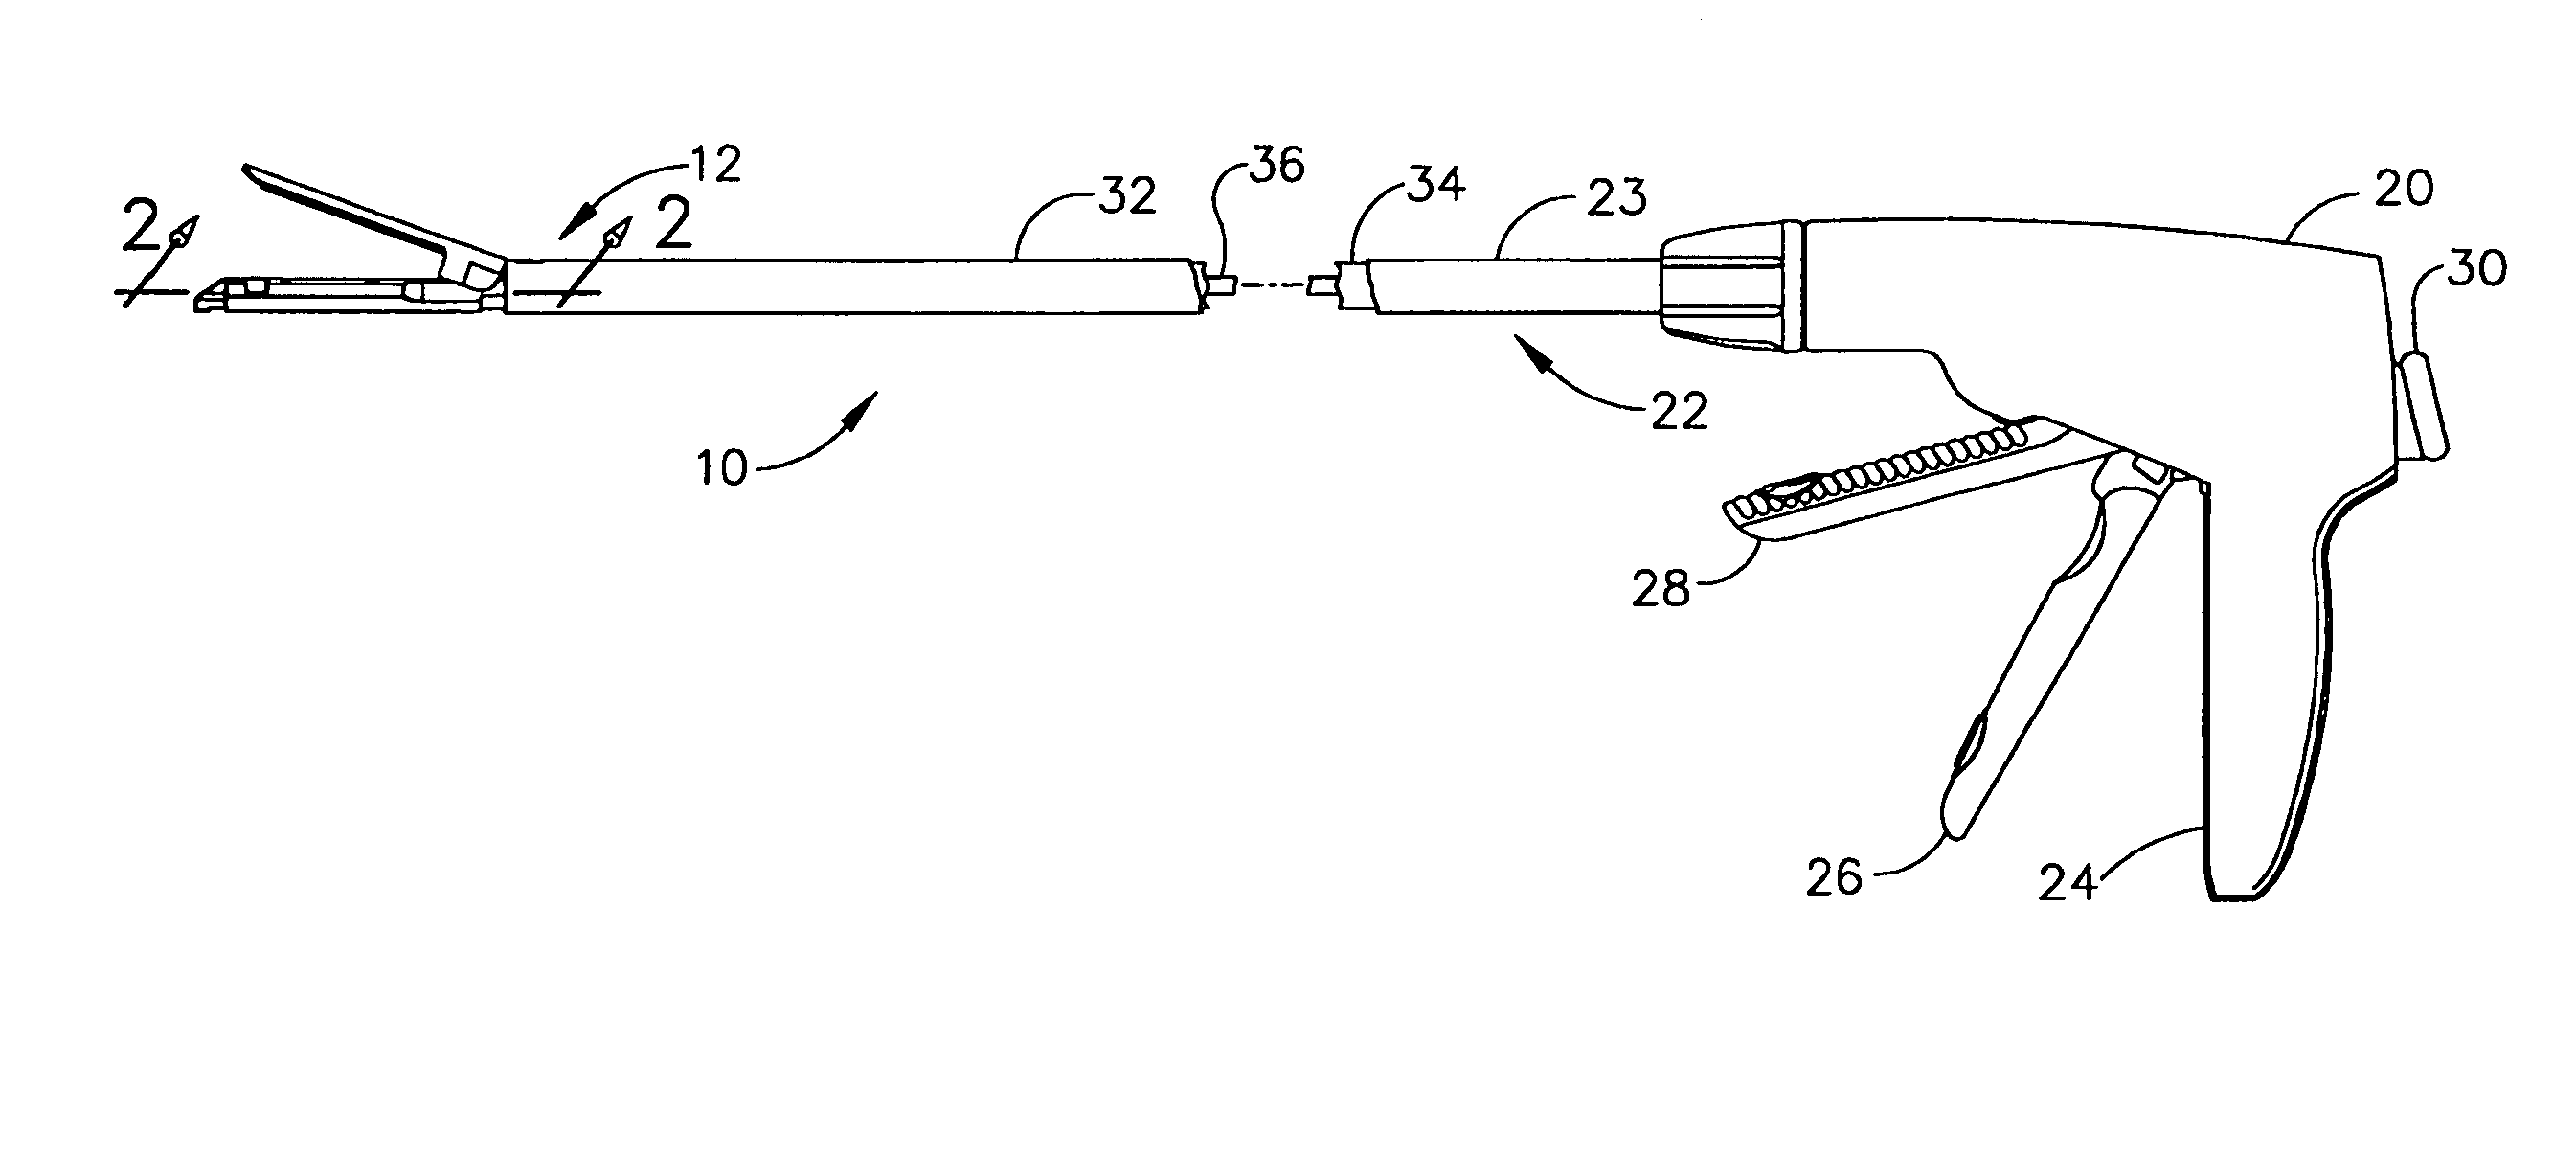 Surgical stapling instrument having a firing lockout for an unclosed anvil